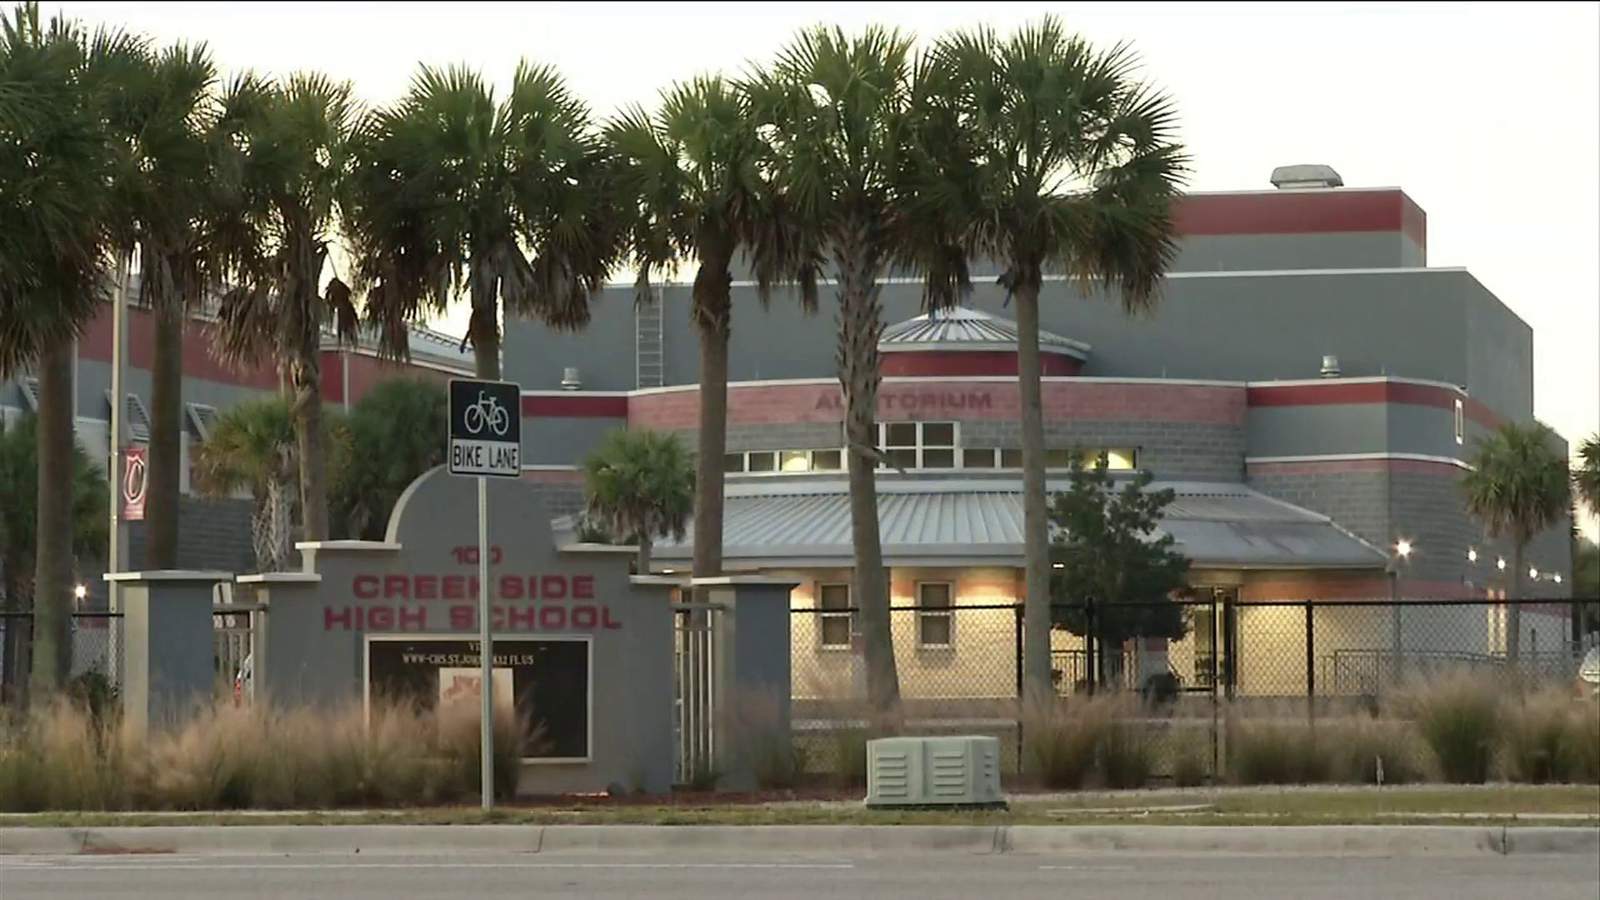 Over 75% of Creekside High students miss school after virus outbreak